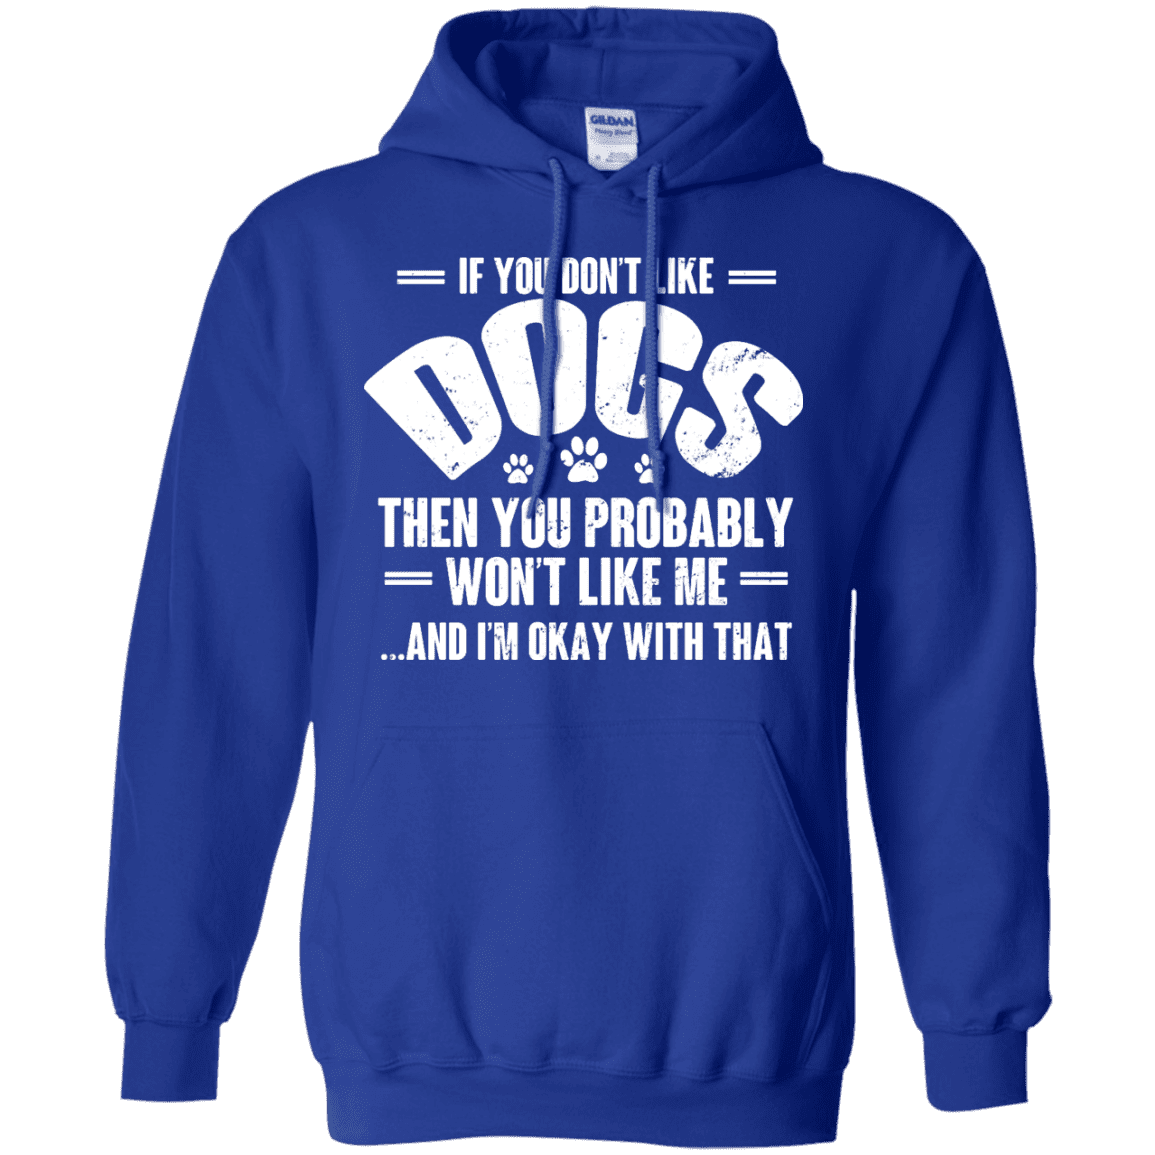 If You Don't Like Dogs - Hoodie.